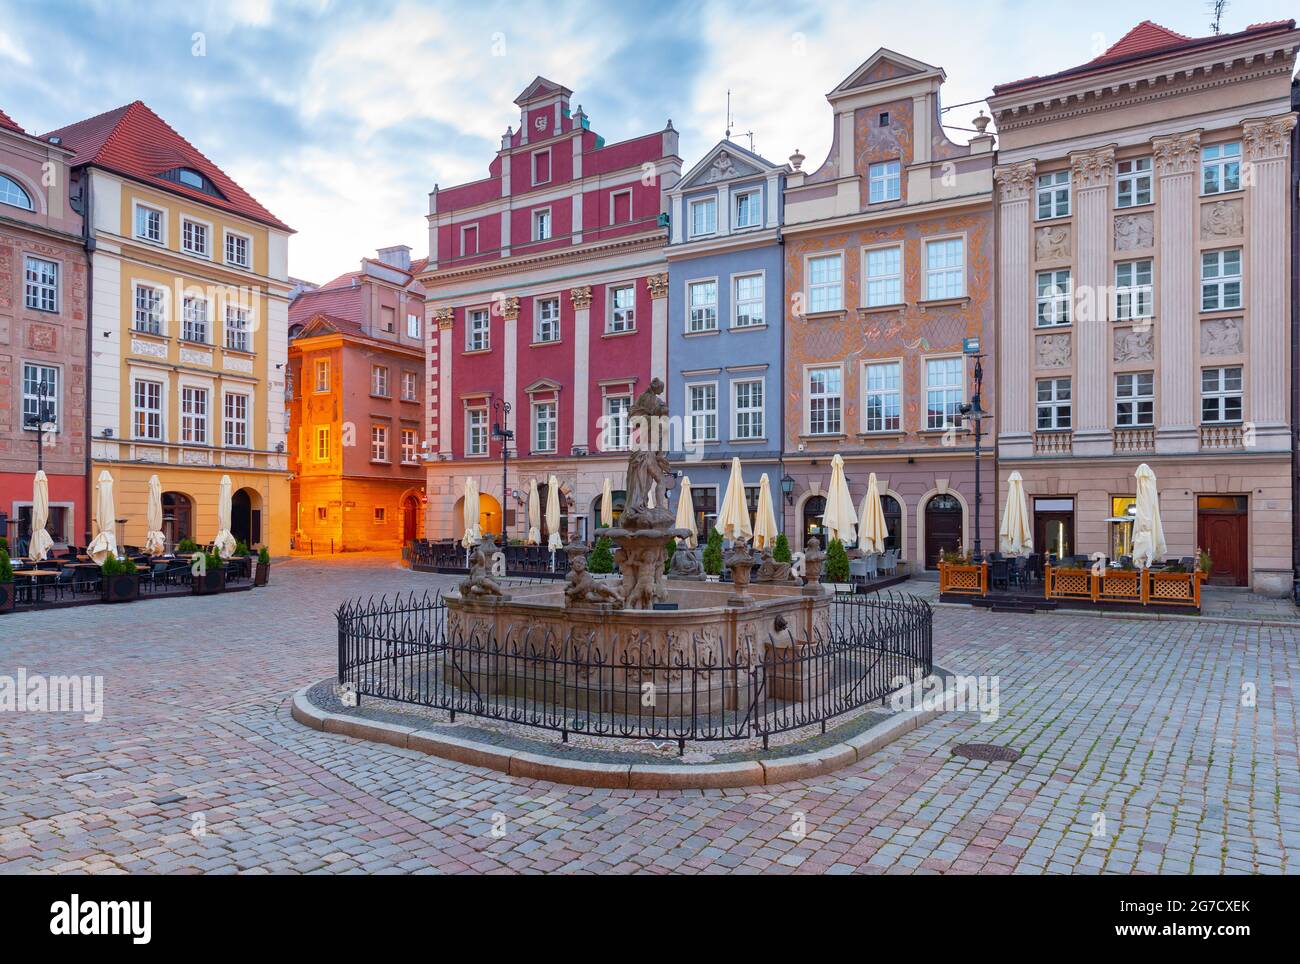 Page 3 - Poznan Poland Sculpture High Resolution Stock Photography and  Images - Alamy